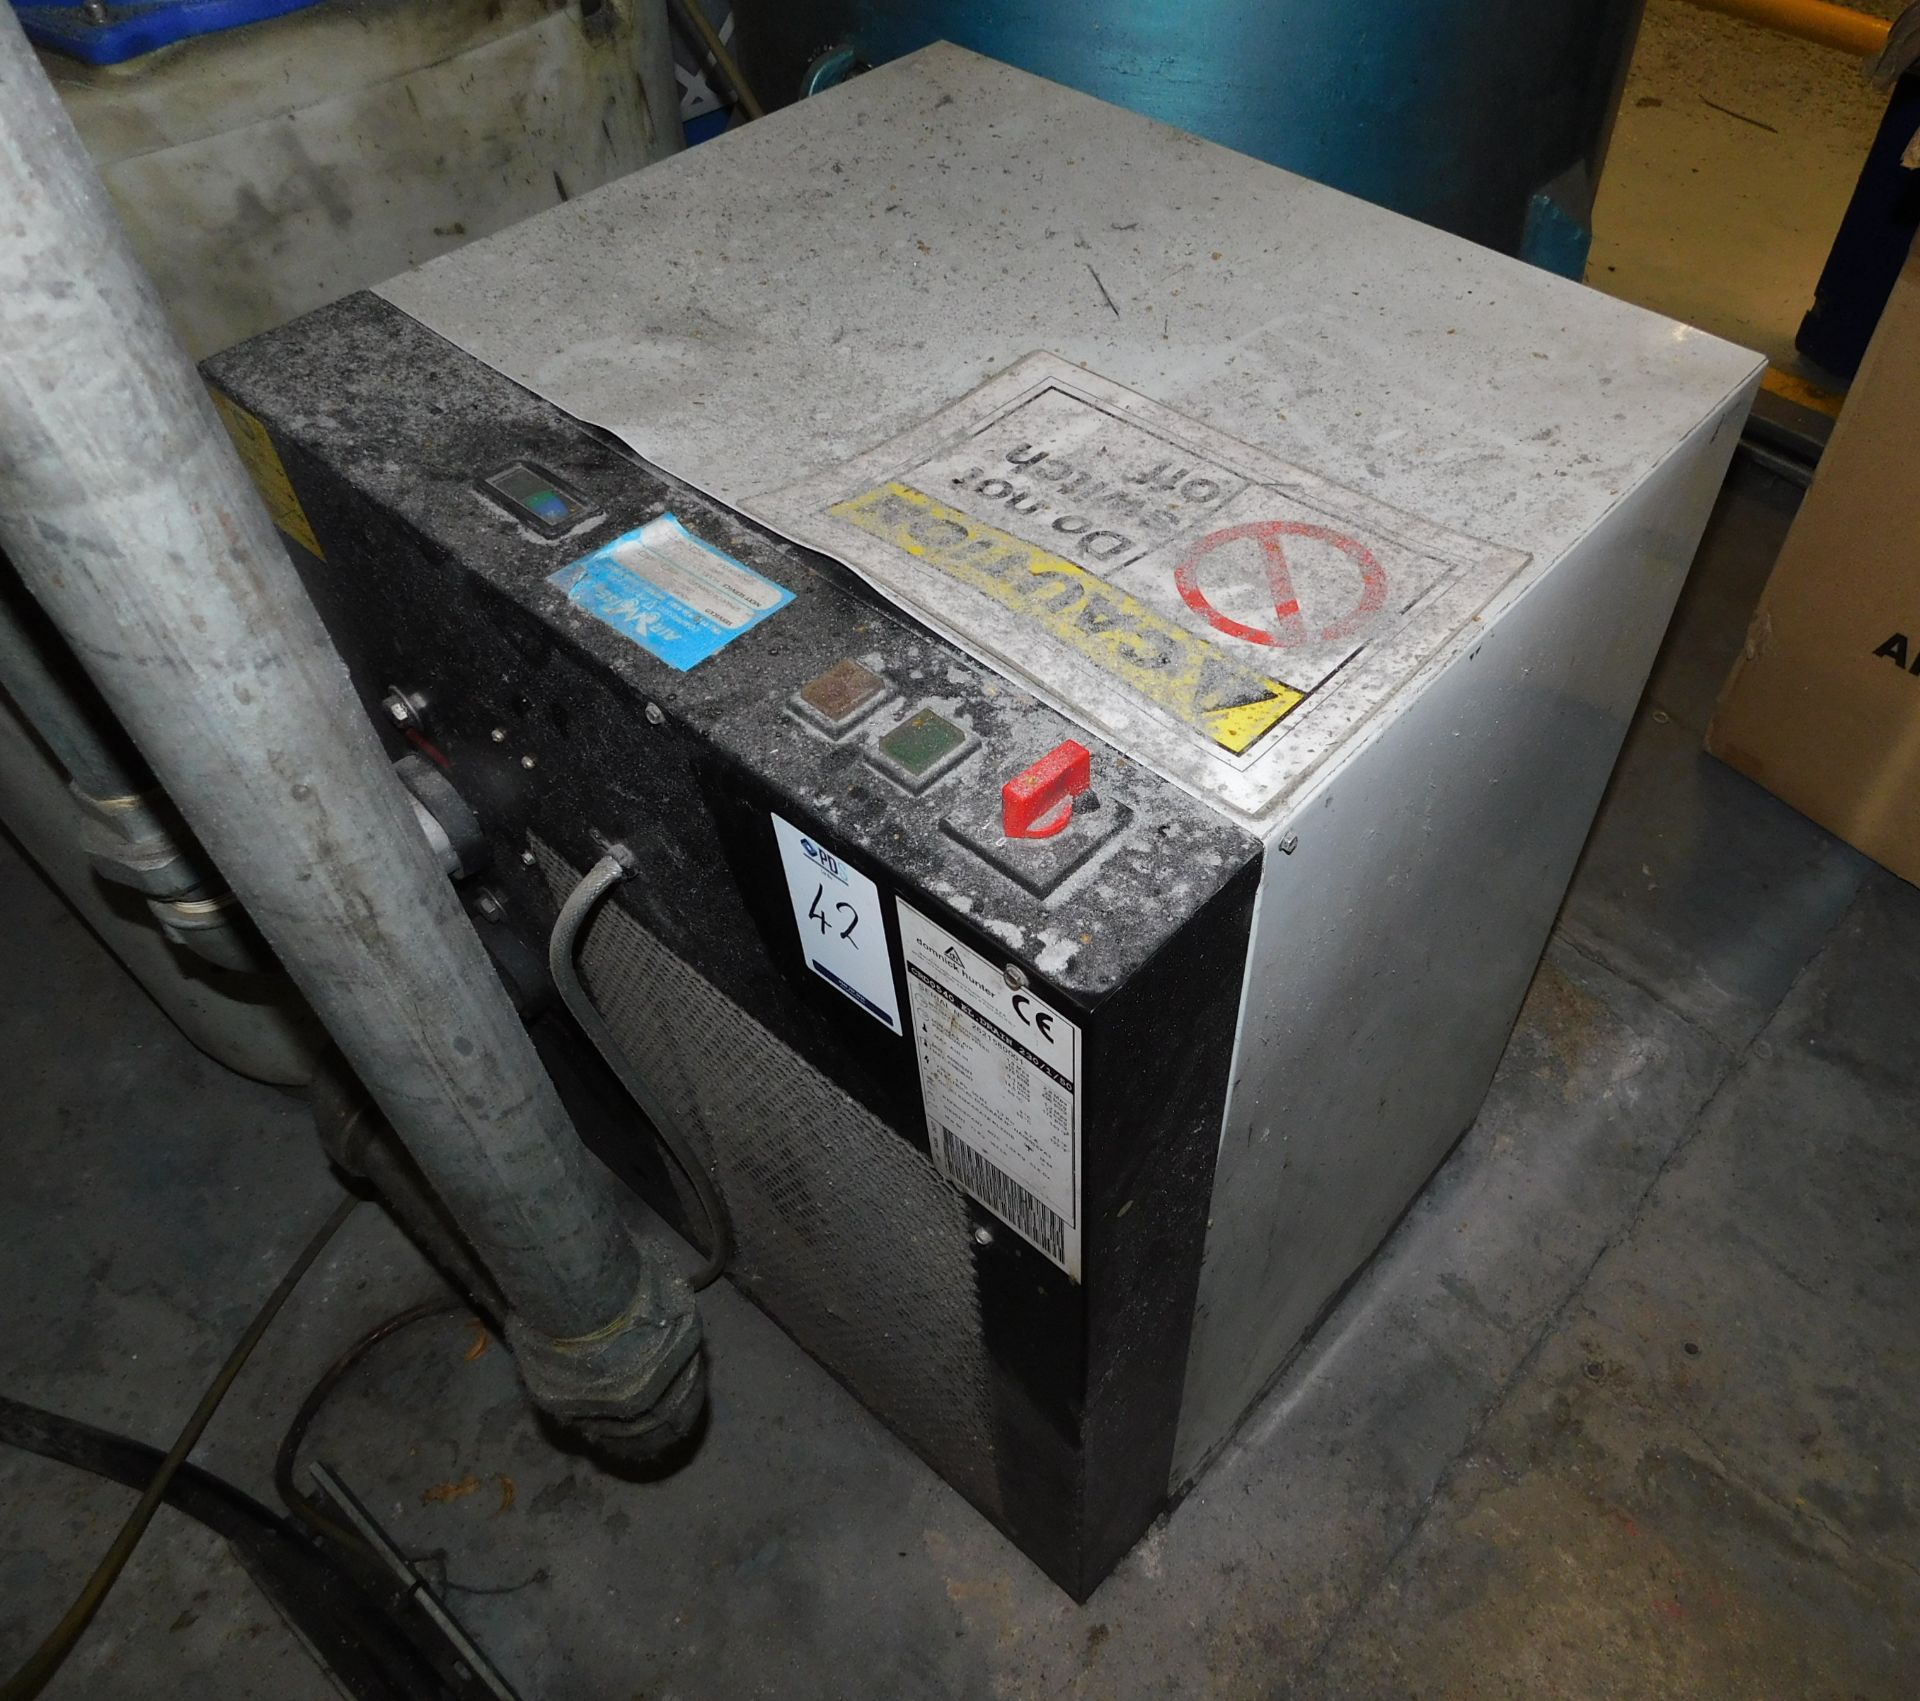 Domnic Hunter CRD0540EL.DRAIN 230/1/50 Refrigerant Dryer, Serial Number: 262158001 with Airwise 1676 - Image 3 of 3